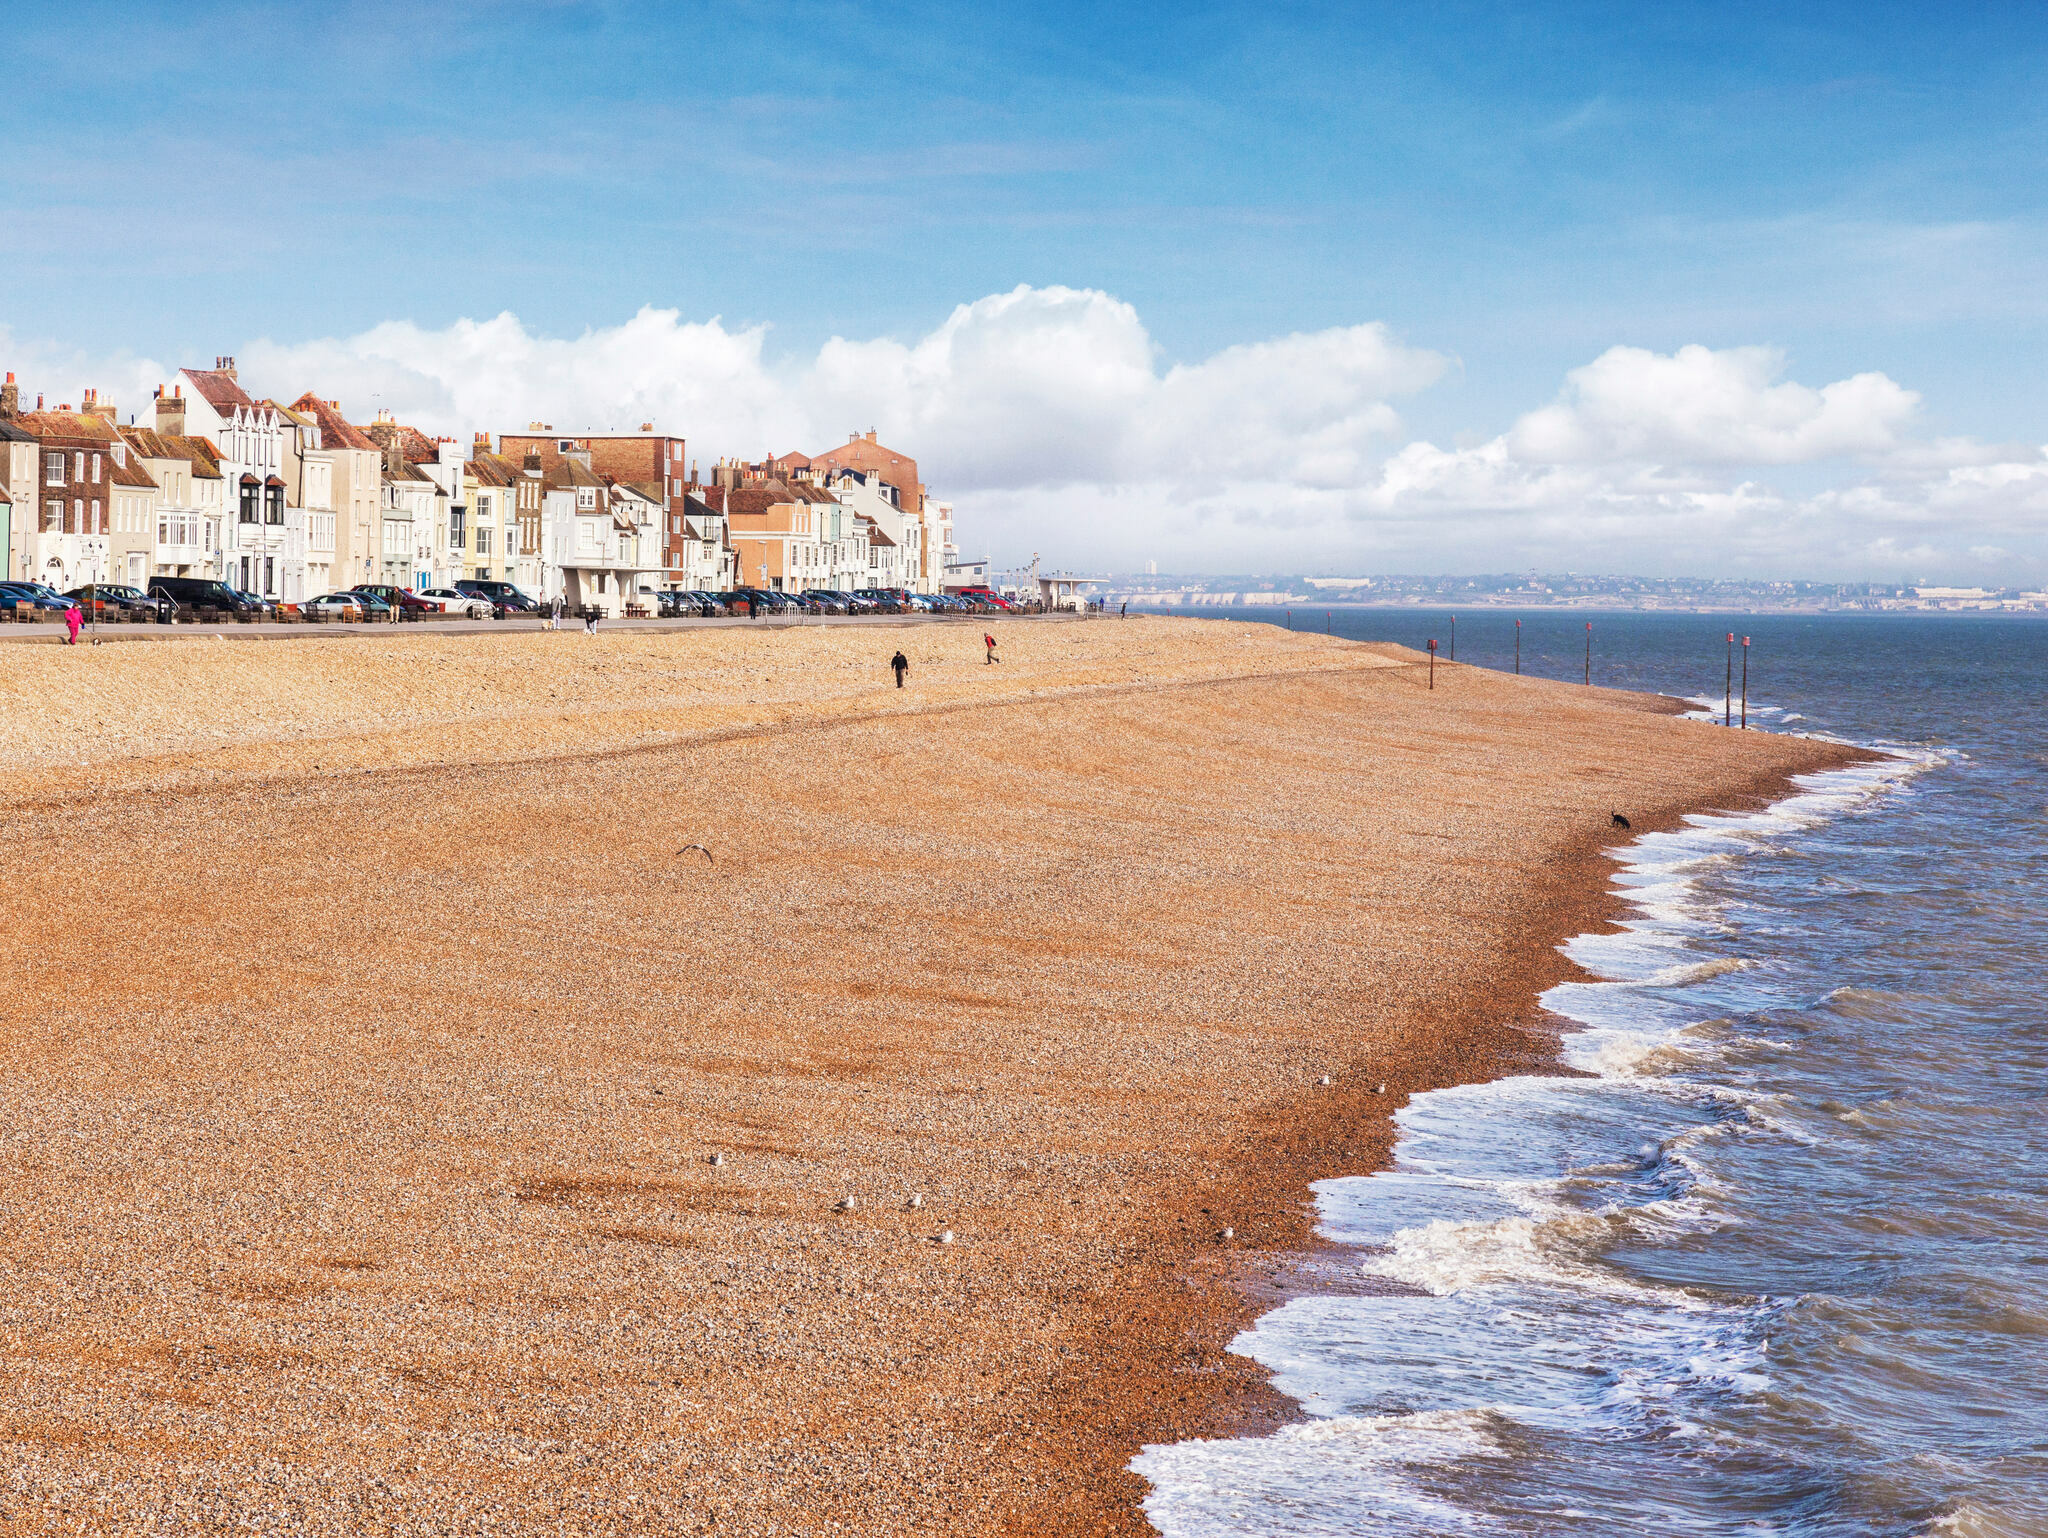 10 Best Things To Do In Deal For The Perfect Seaside Getaway